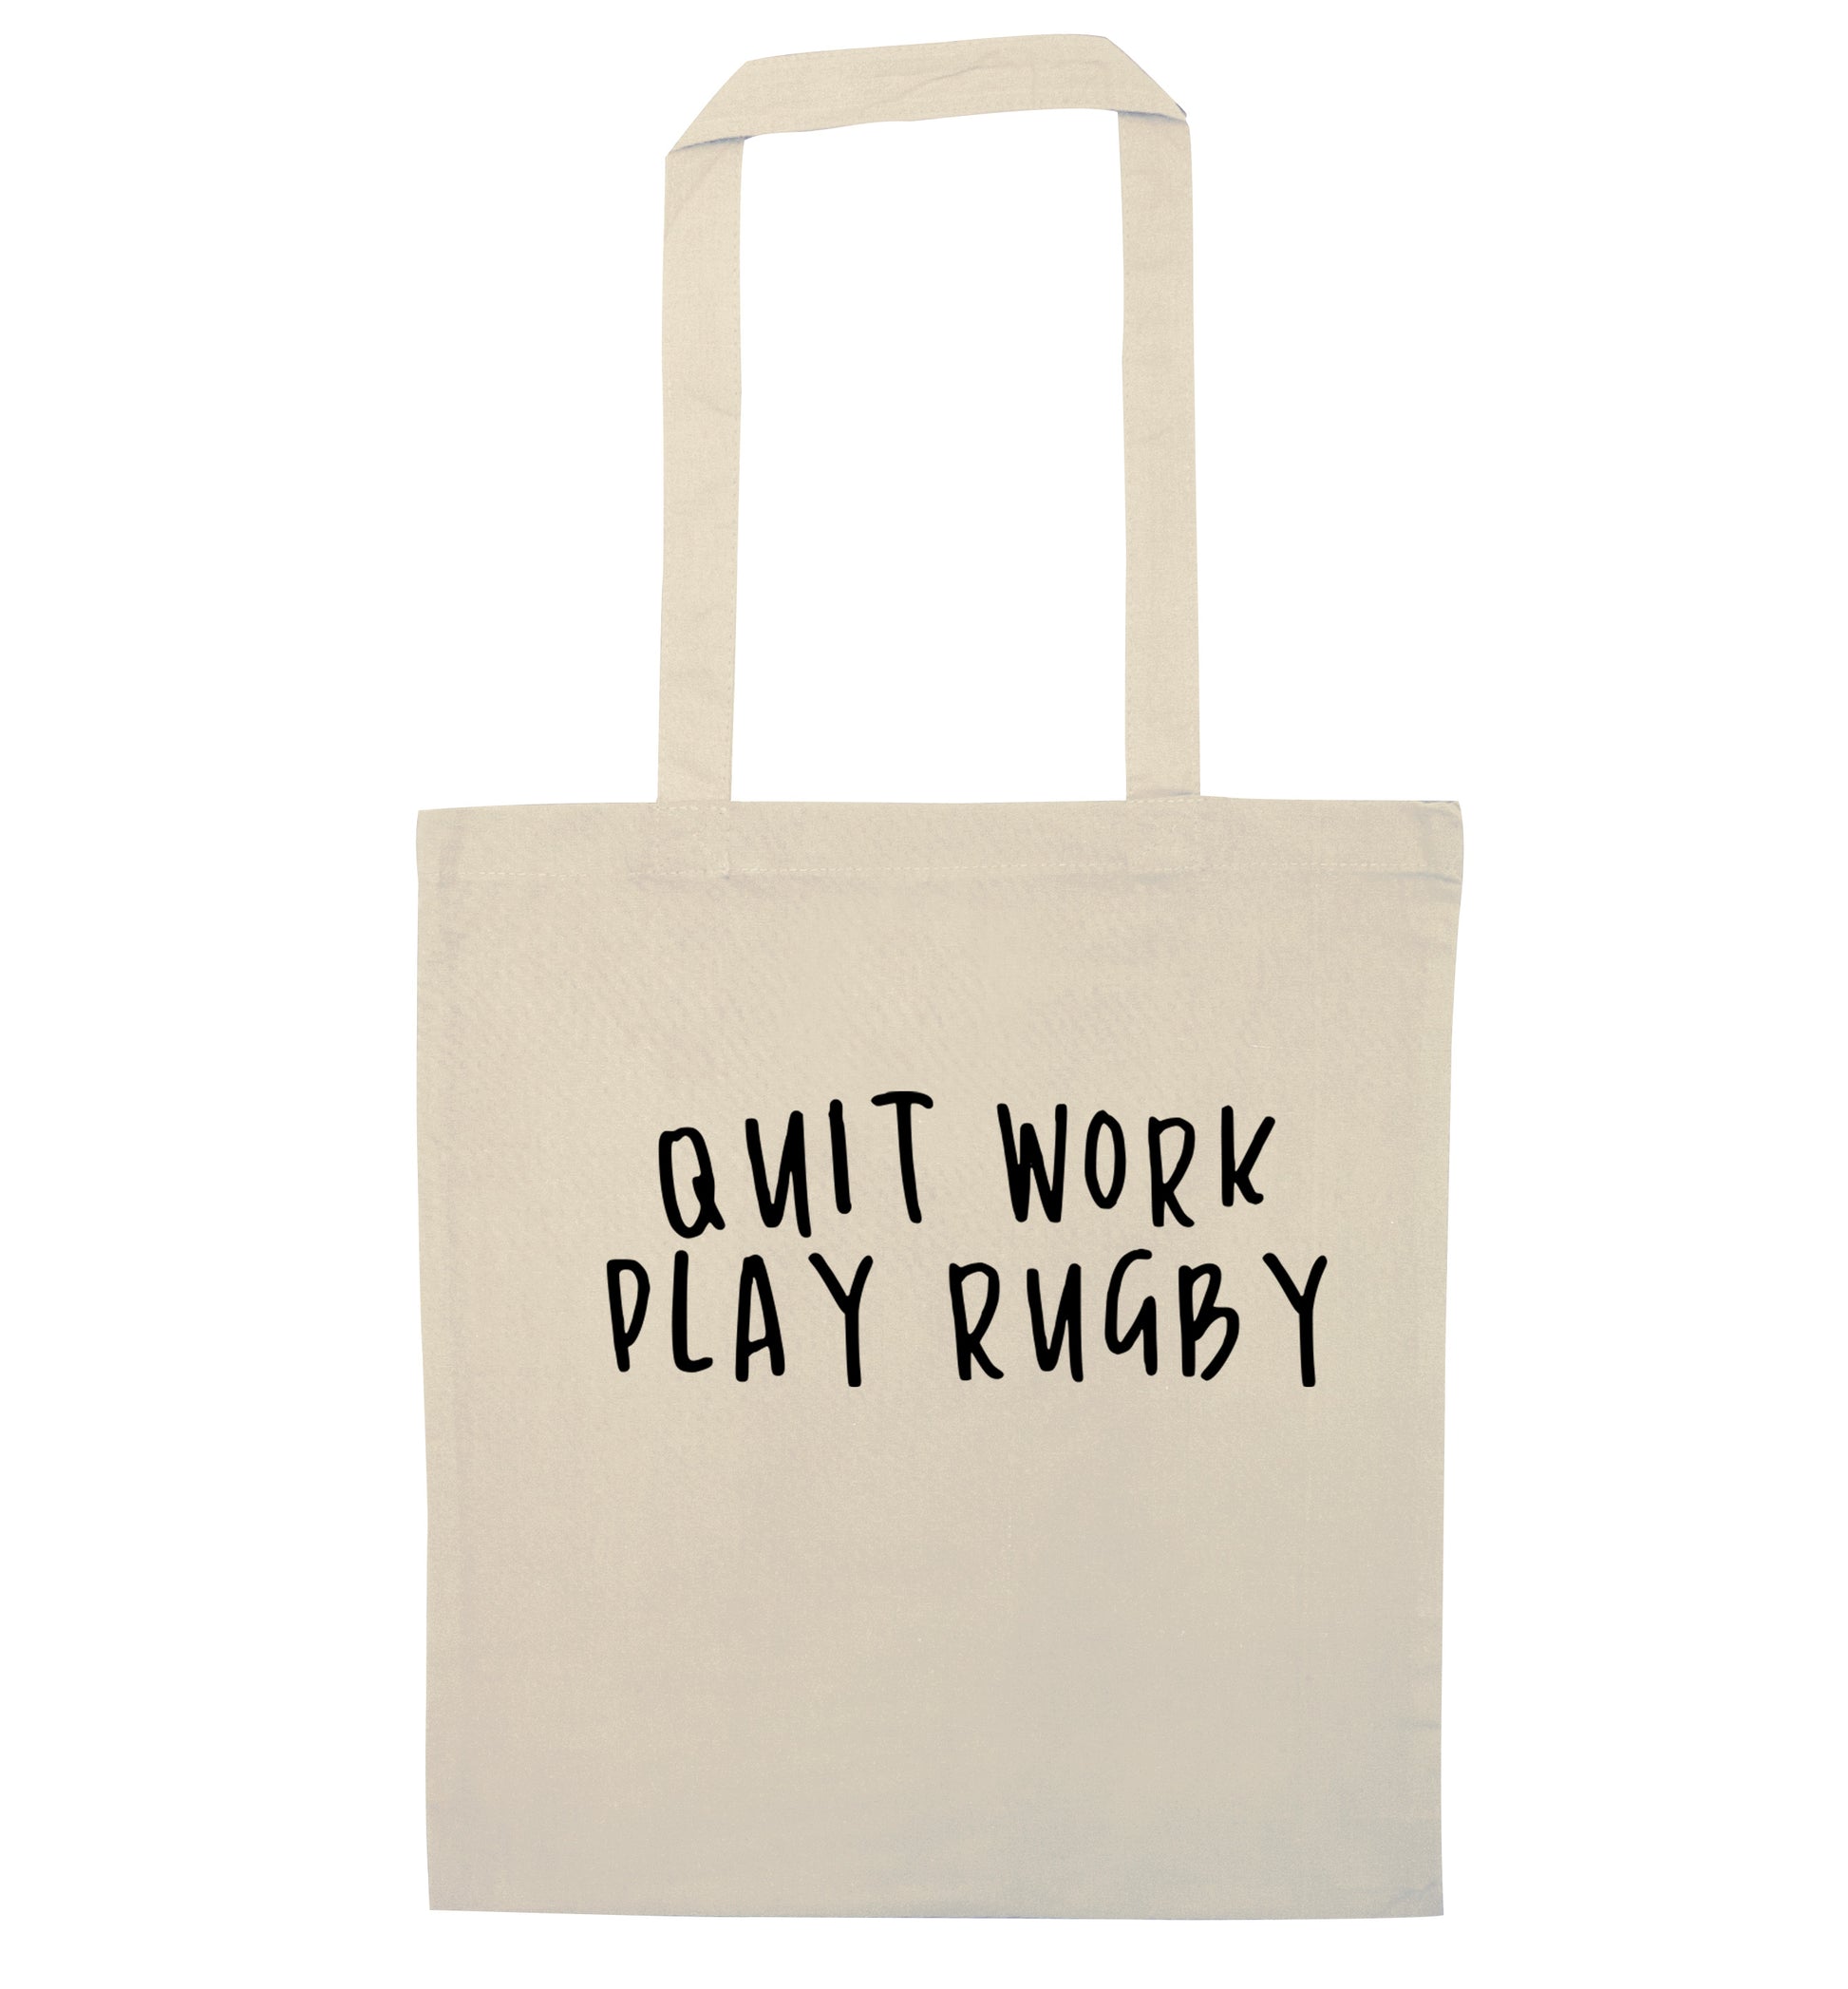 Quit work play rugby natural tote bag